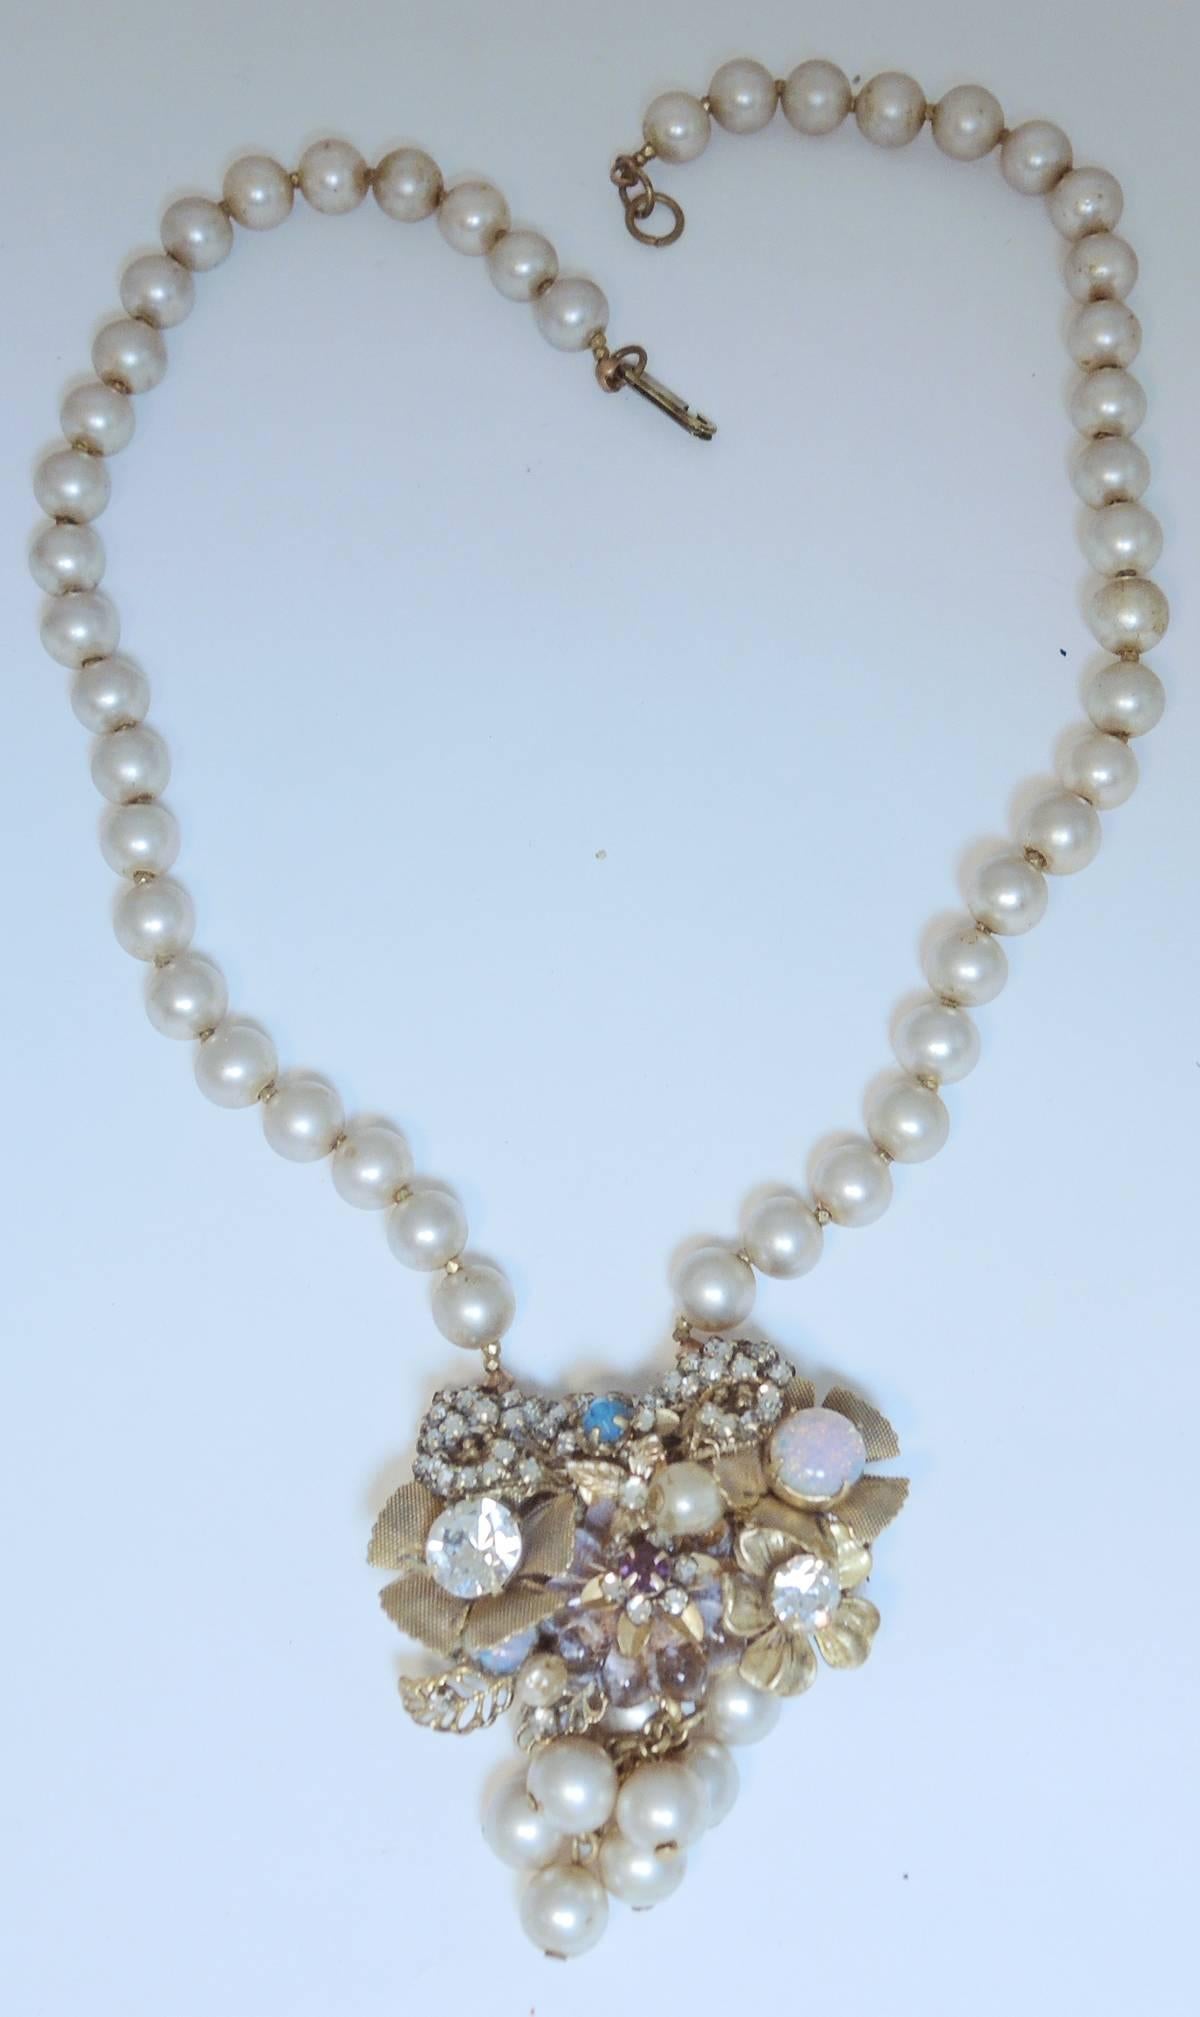 This vintage Miriam Haskell necklace features a single strand of faux pearls that lead down to a magnificent centerpiece. The centerpiece has golden leaves with a crystal and faux opal centers. The centerpiece is accentuated with rose montee stones.